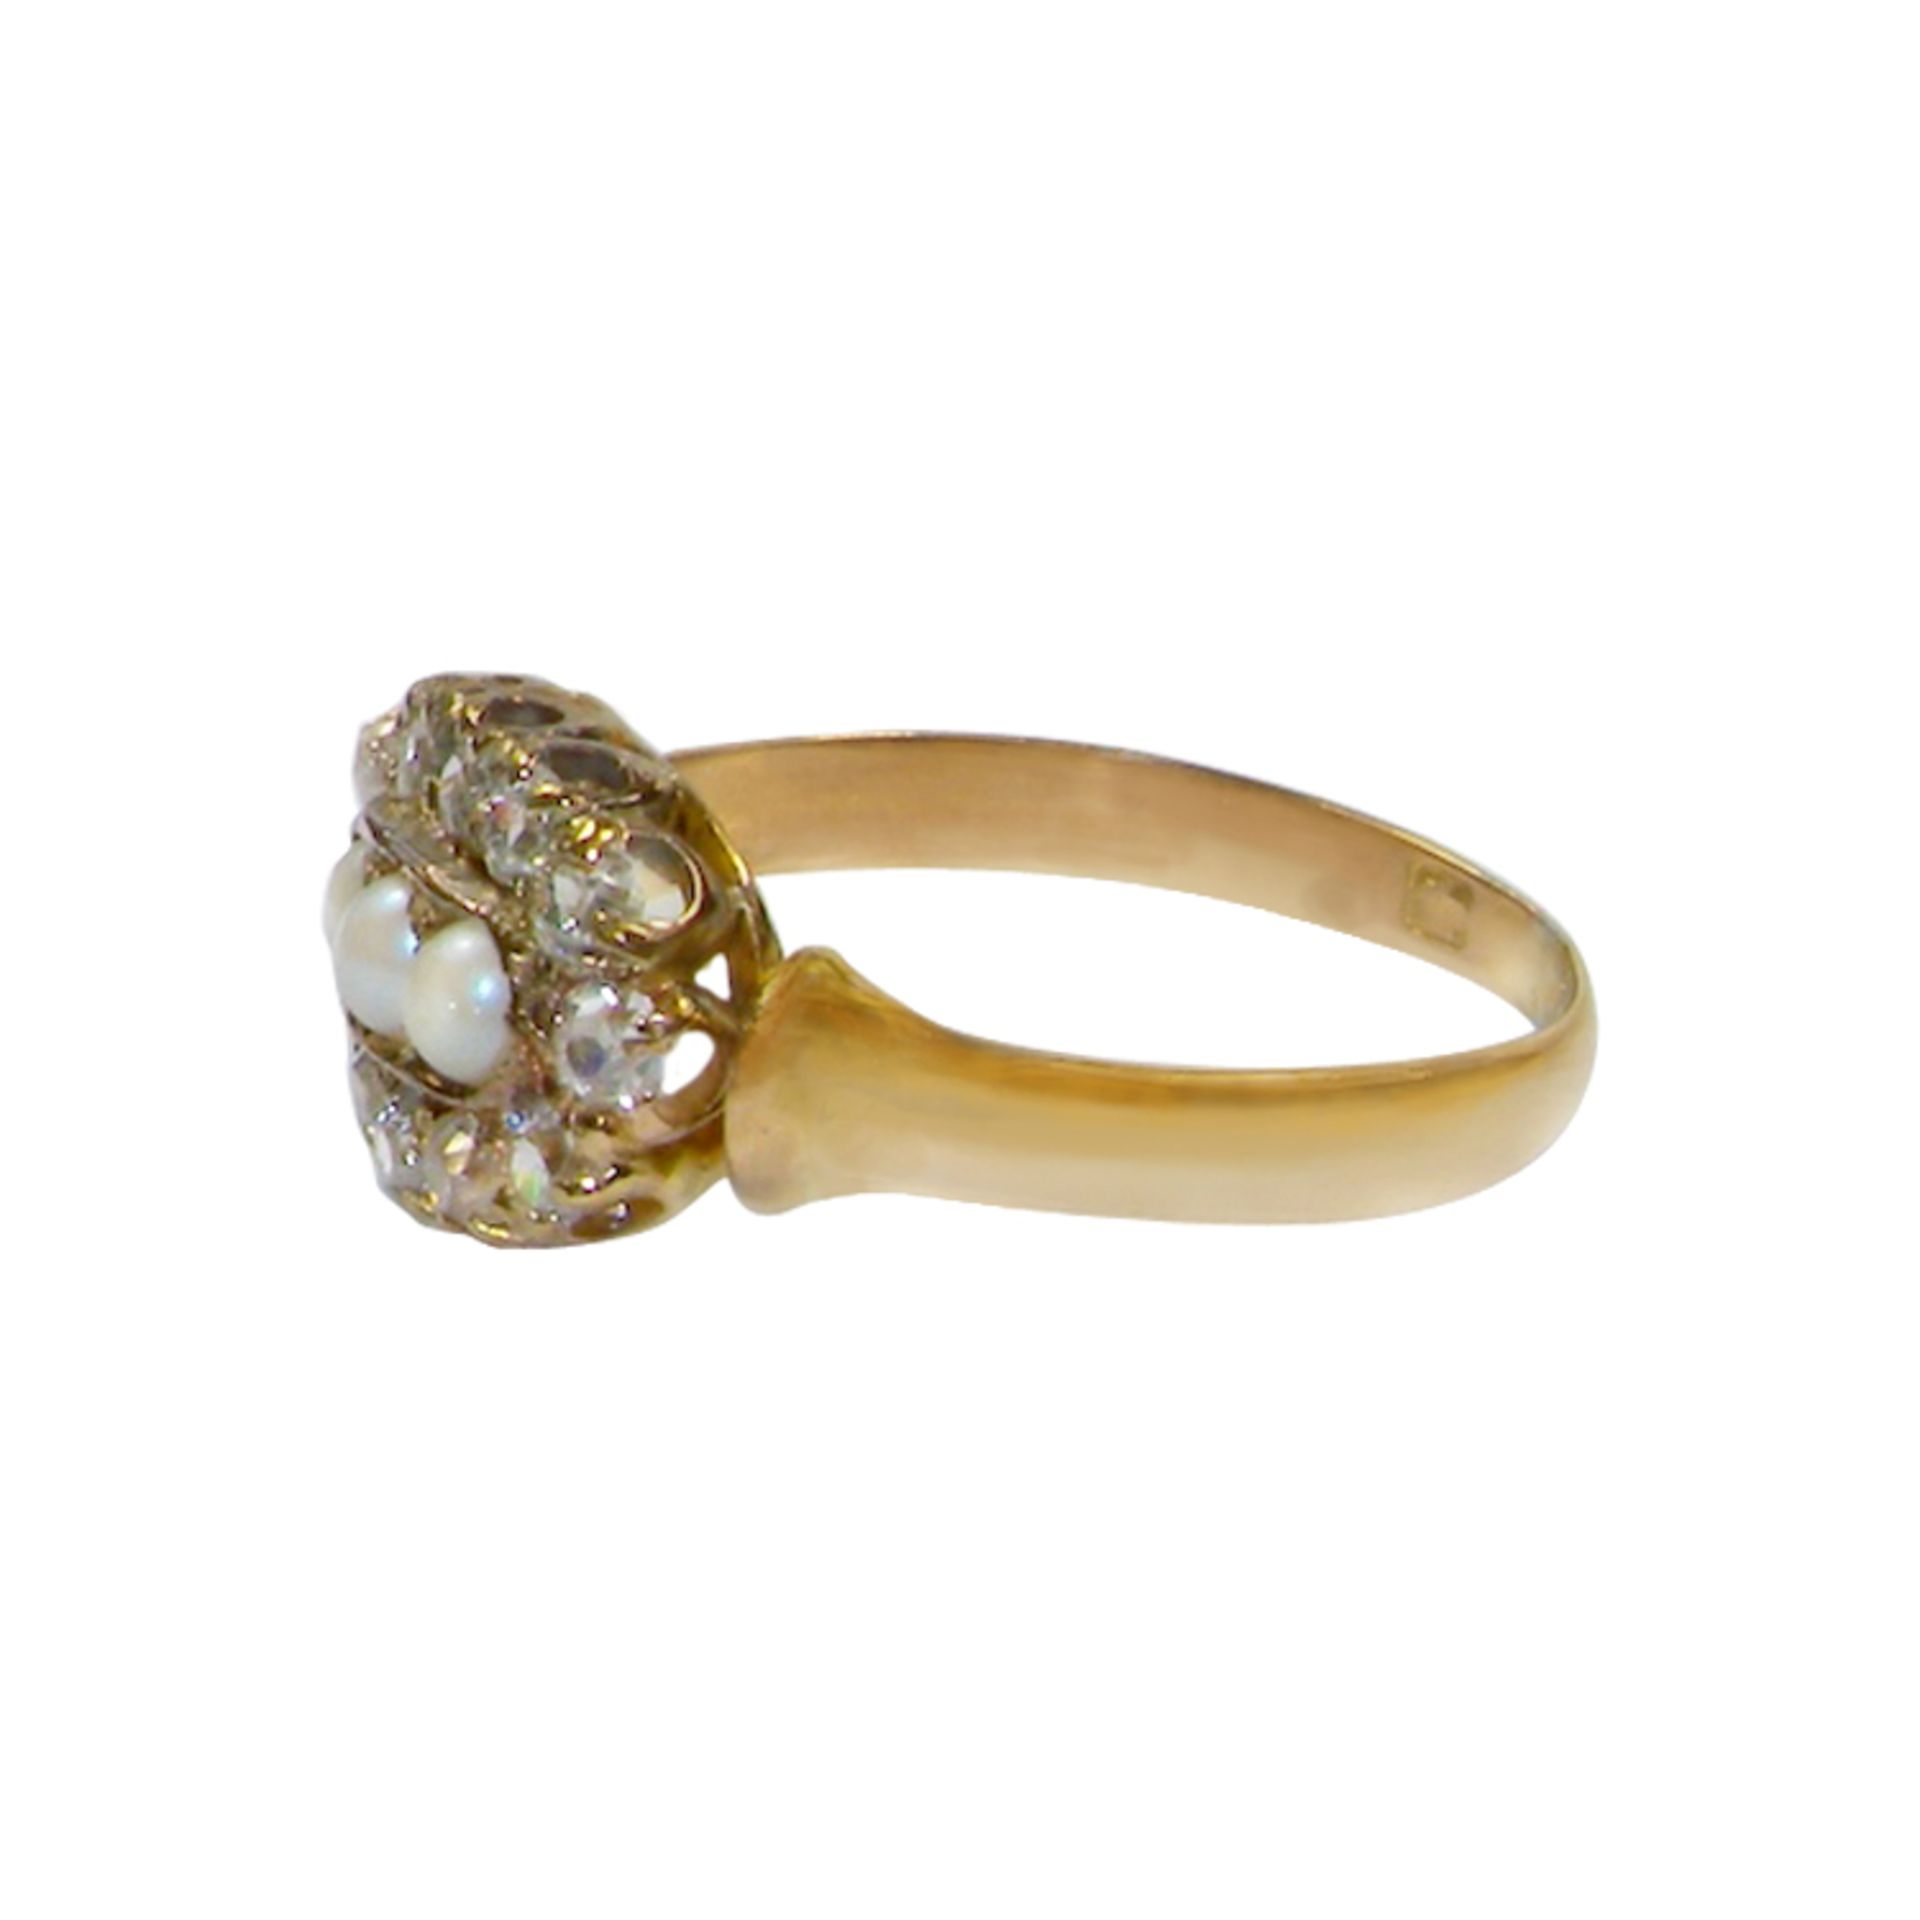 An Antique Seed Pearl & Diamond Ring - Image 2 of 4